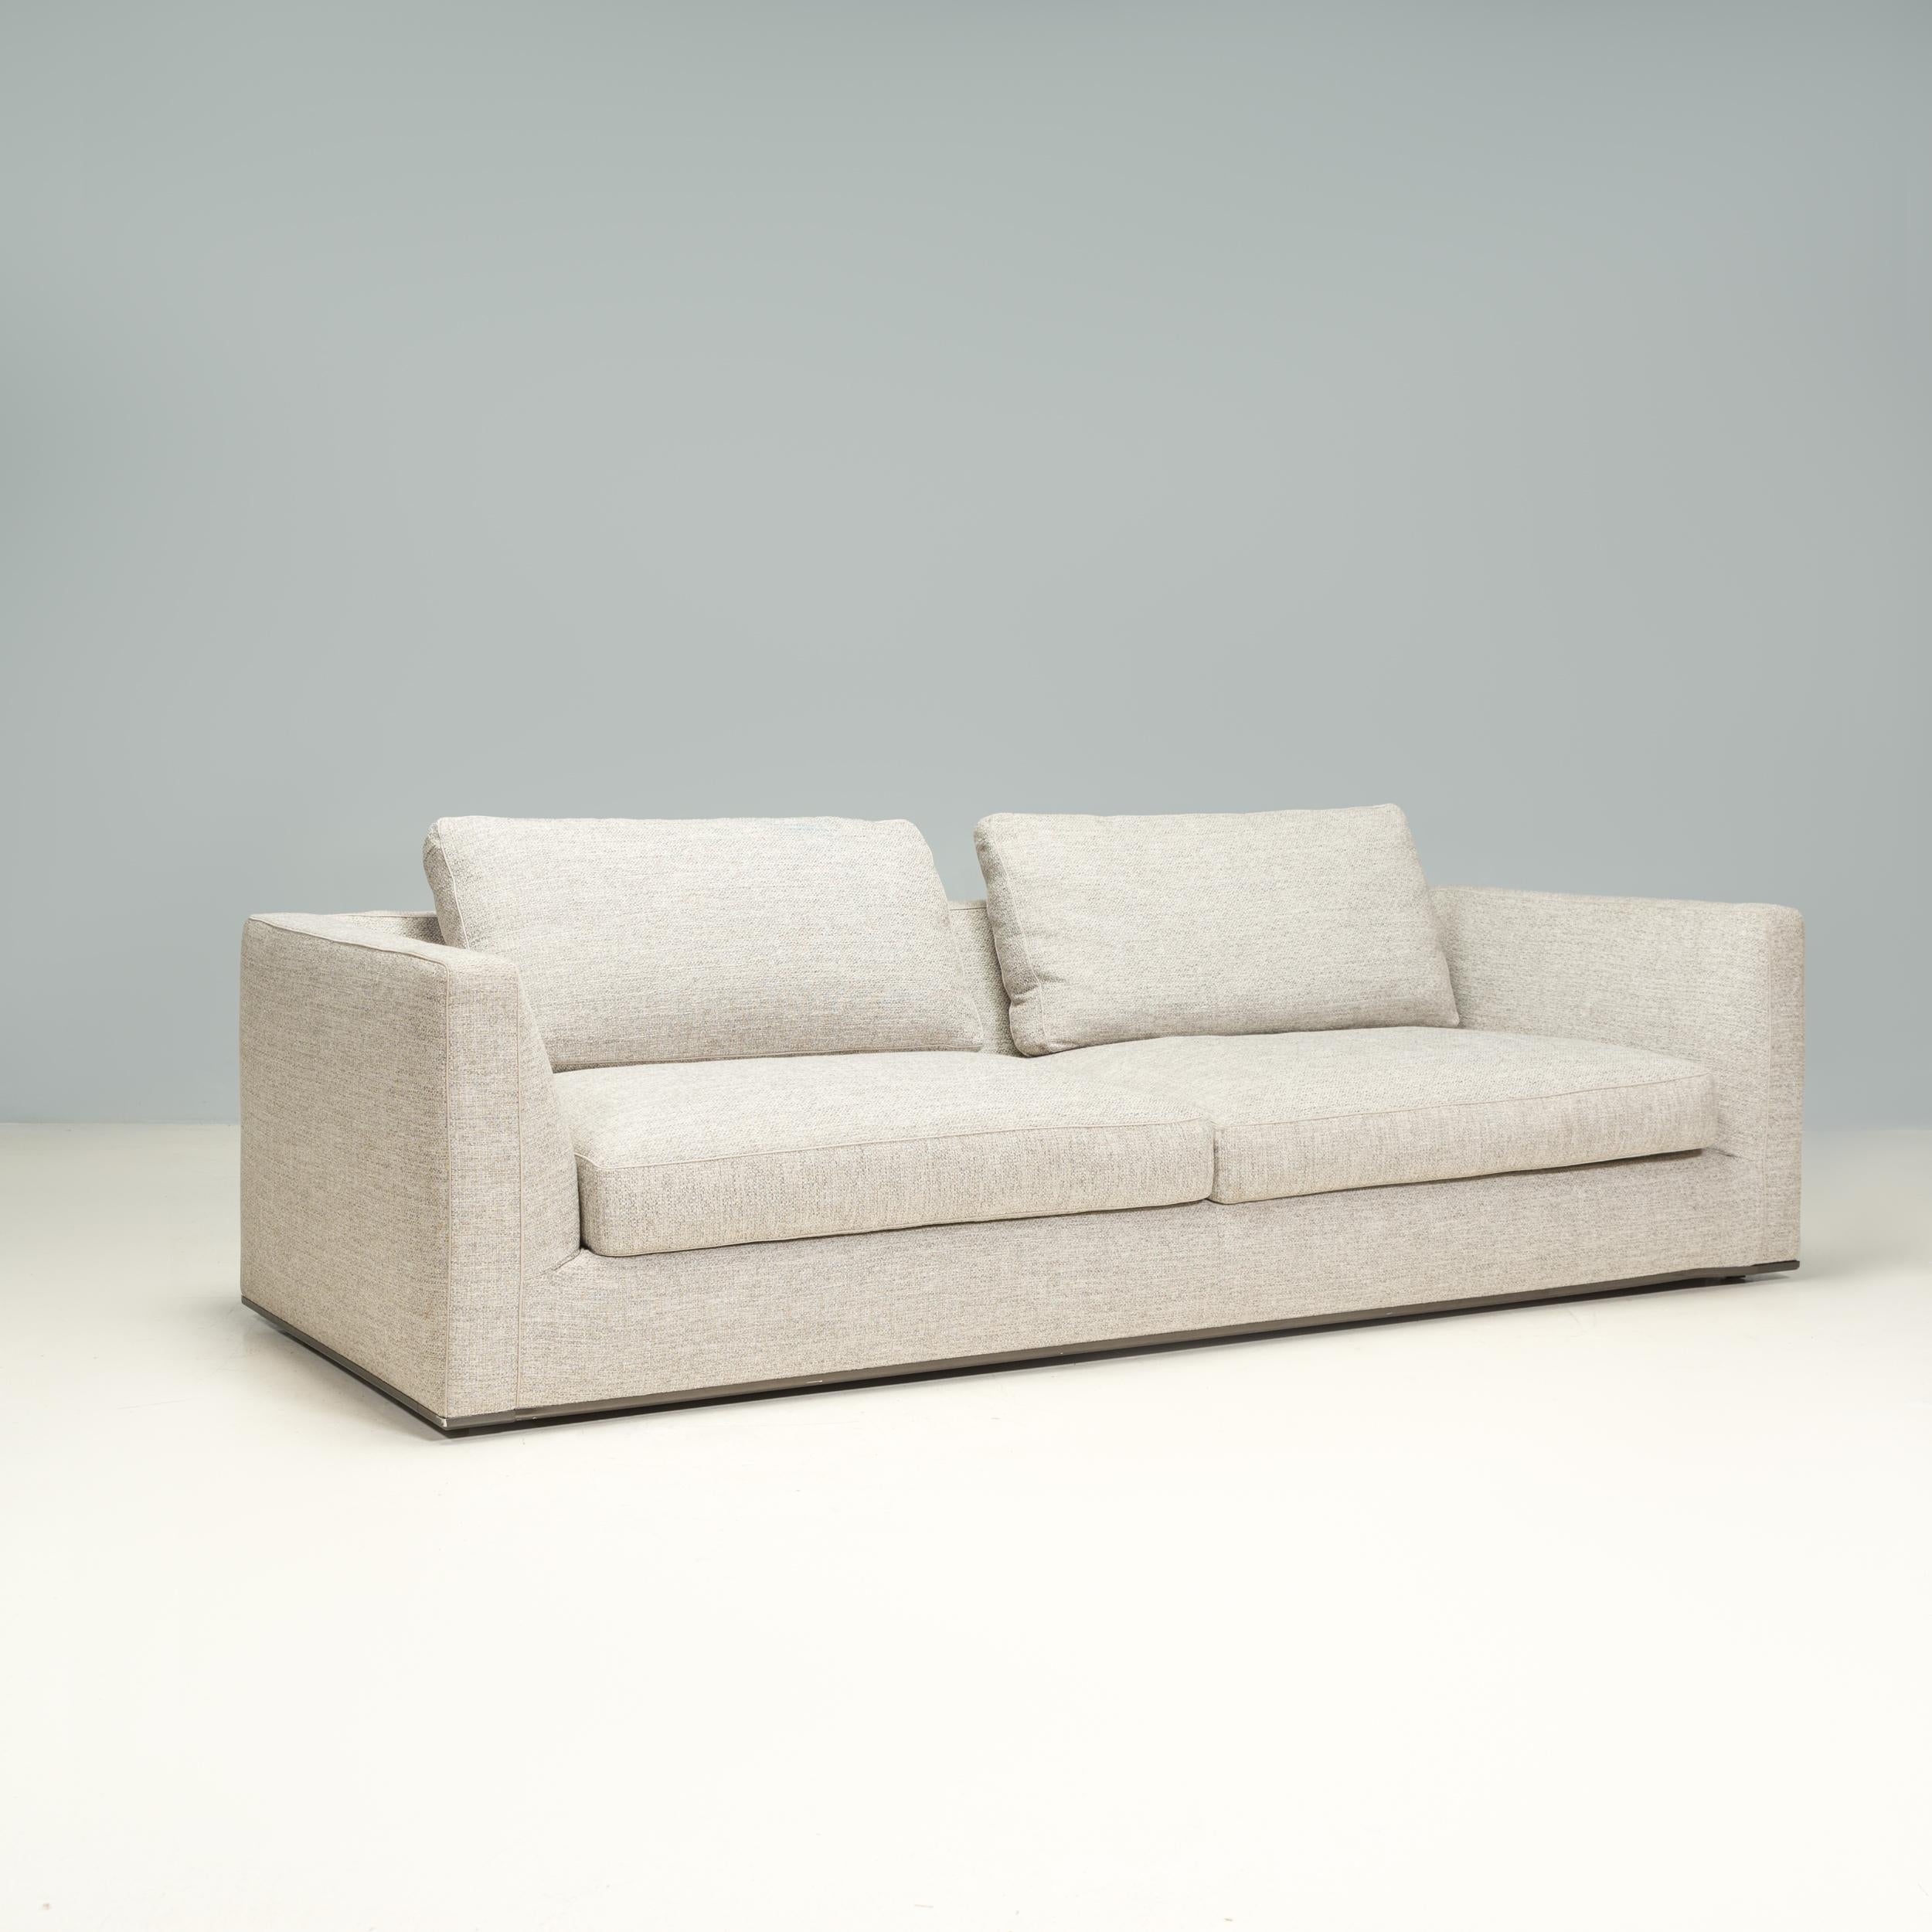 Originally designed by Antonio Citterio for B&B Italia in 2016, the Richard sofa is a fantastic example of contemporary Italian design.

The two seat sofa is constructed from a tubular steel frame, with a slimline tuxedo style silhouette.

With deep